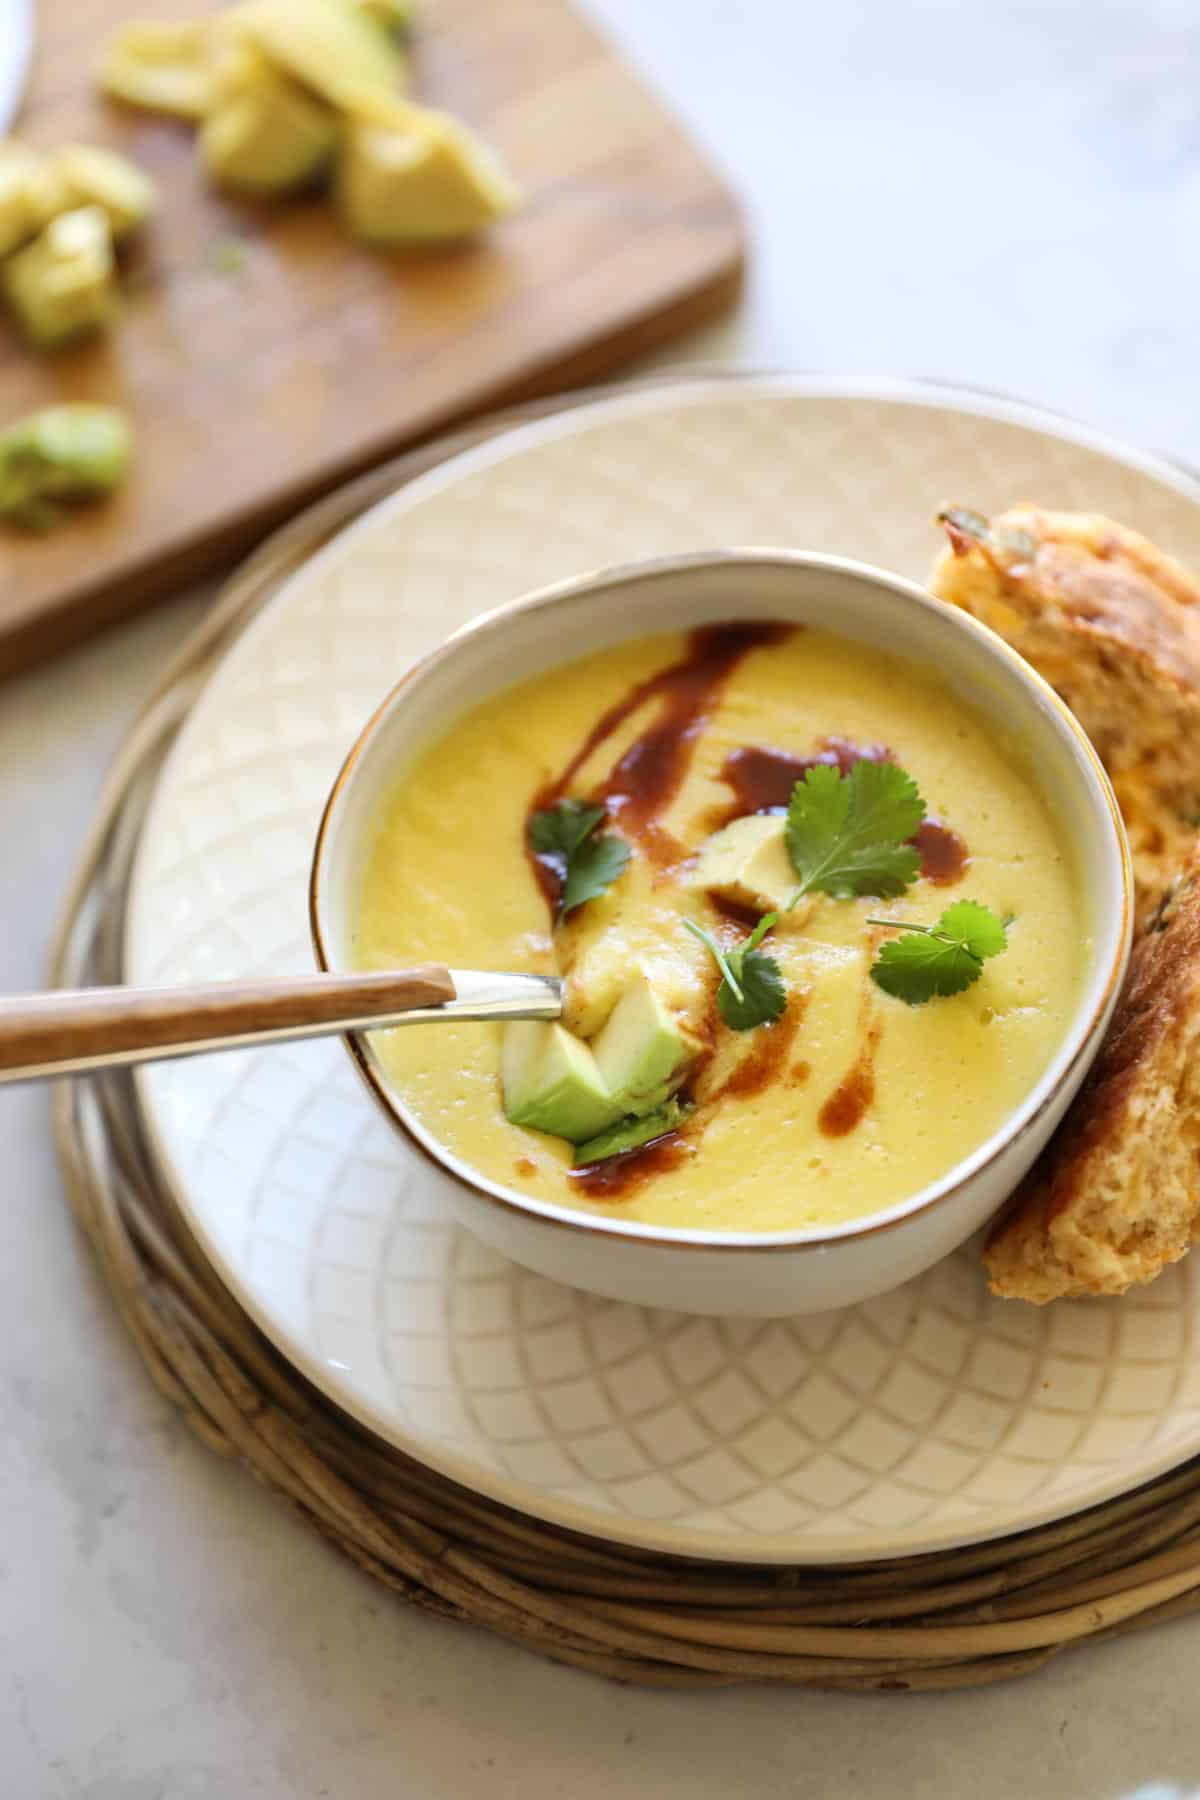 creamy corn soup with hot sauce swirled into it topped with avocado and cilantro